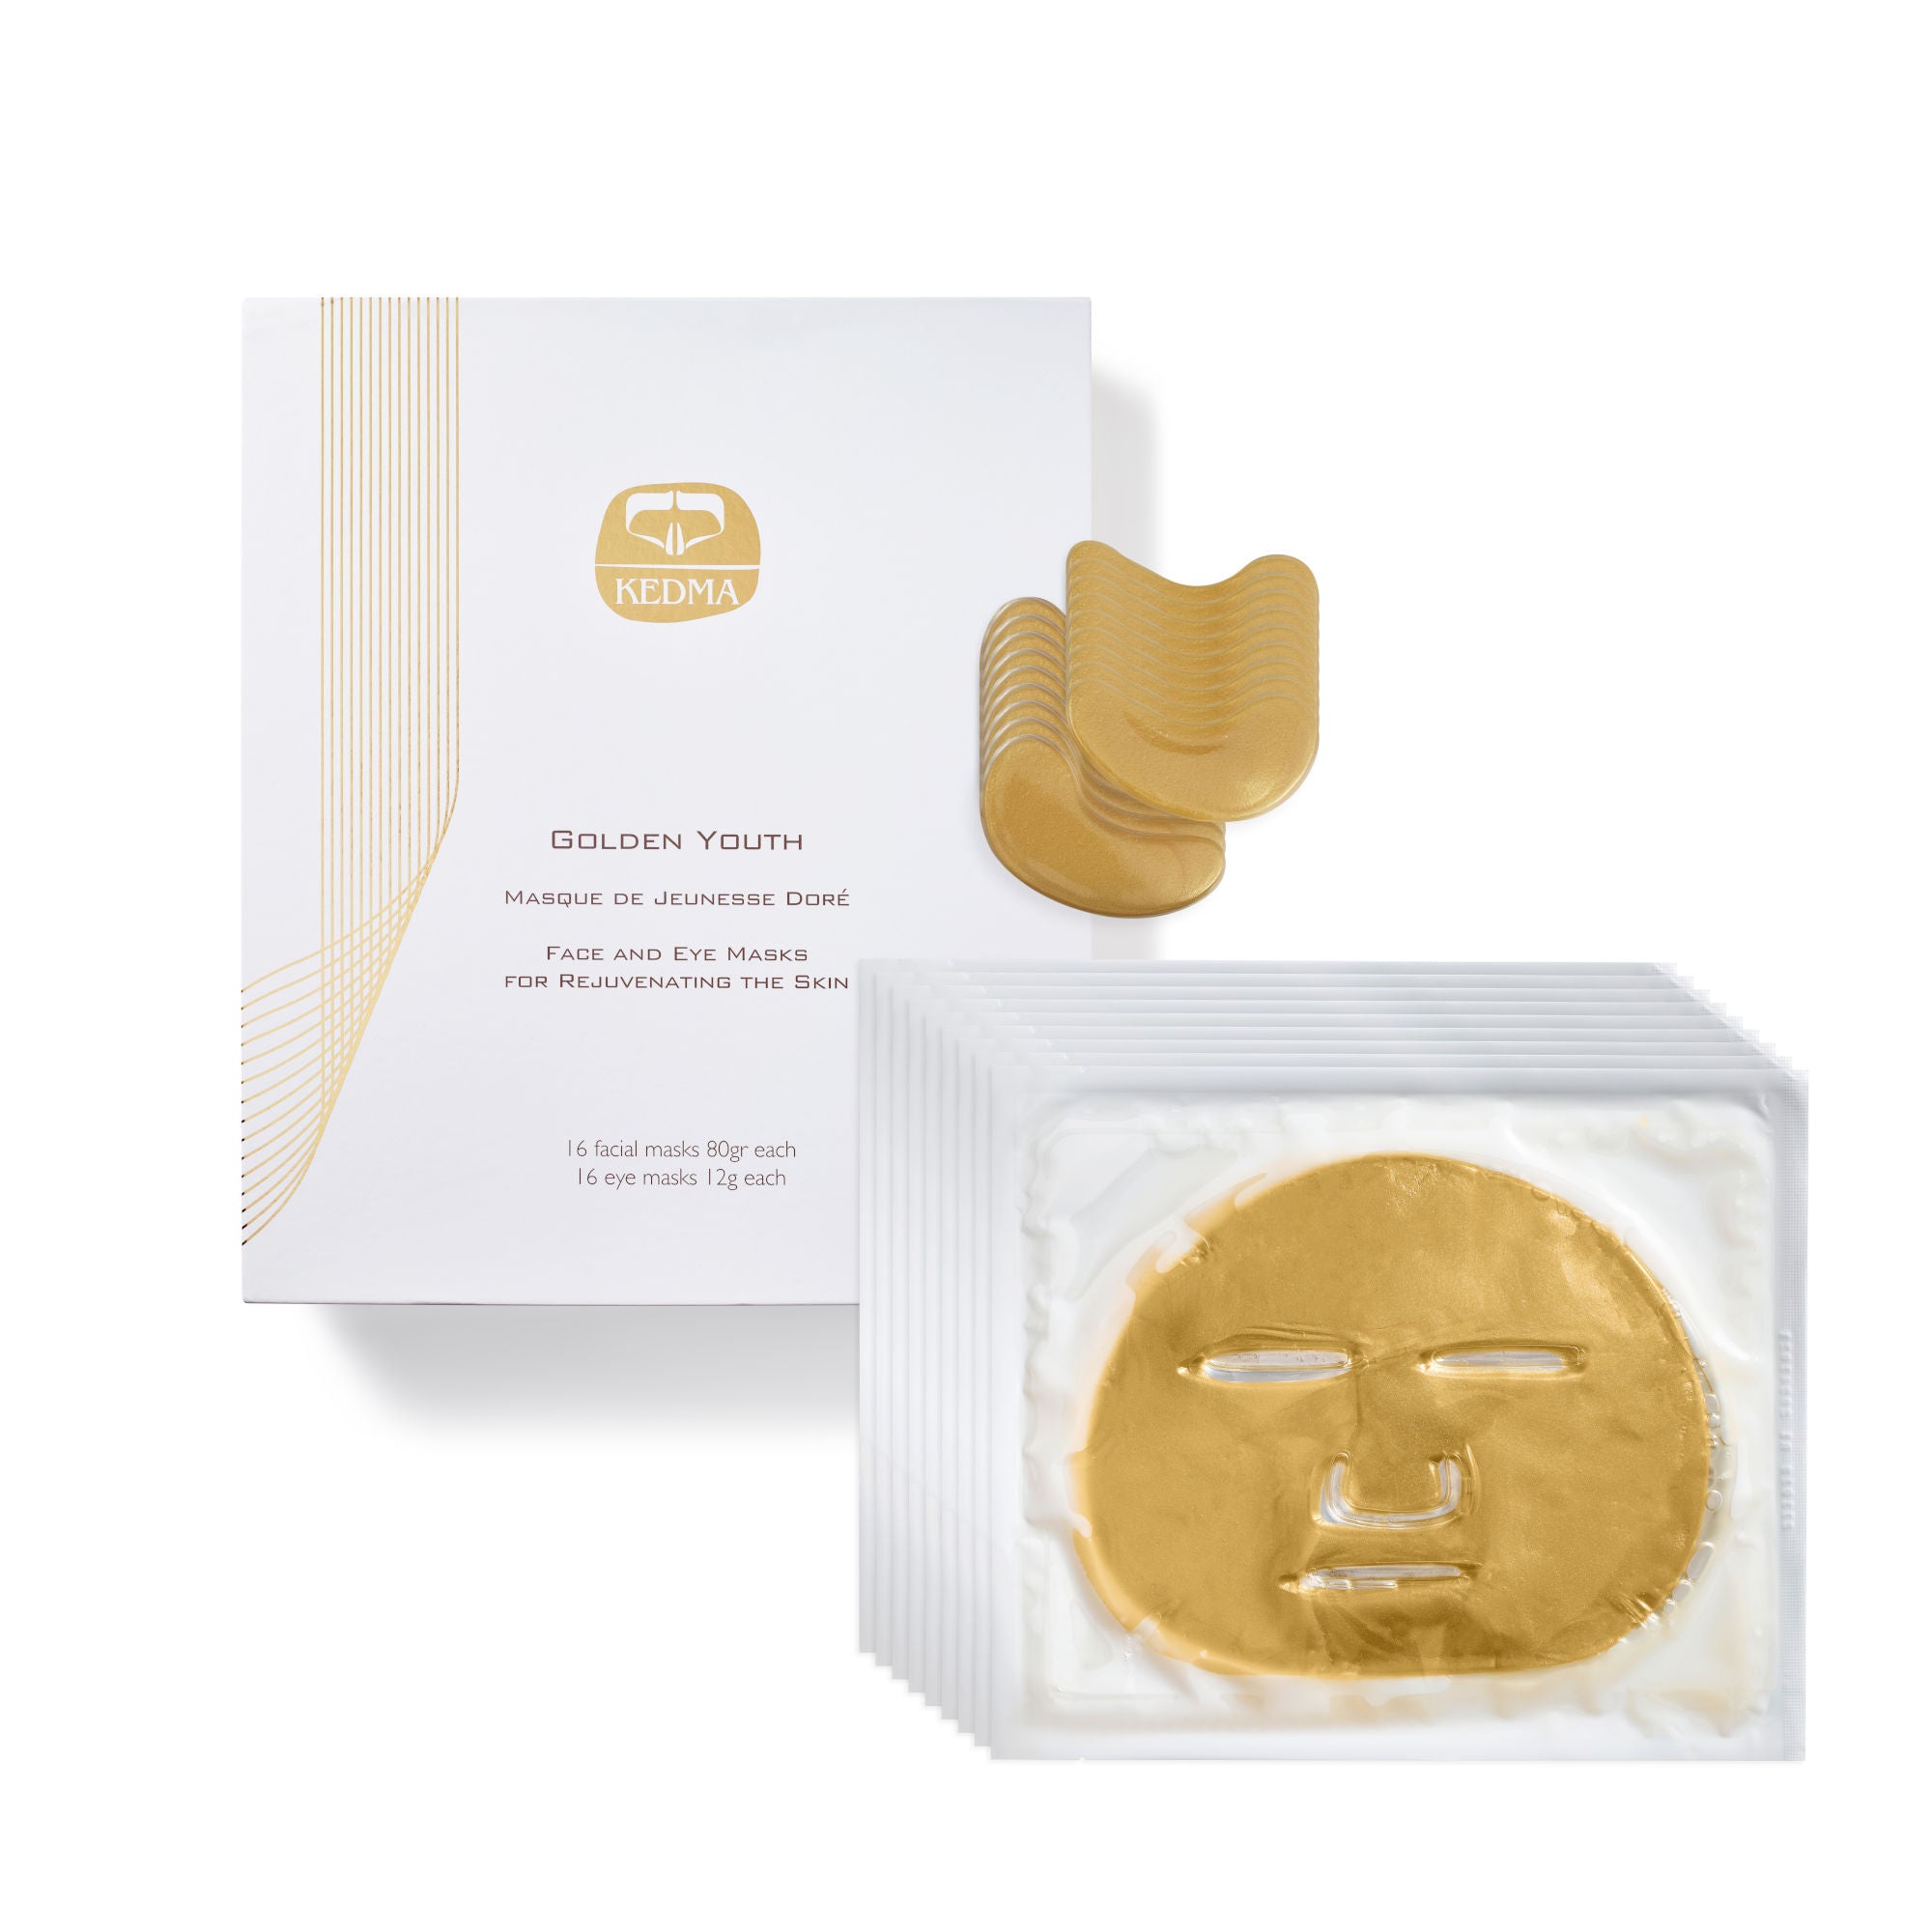 Golden Youth - A Set of Gold Face and Eye Masks